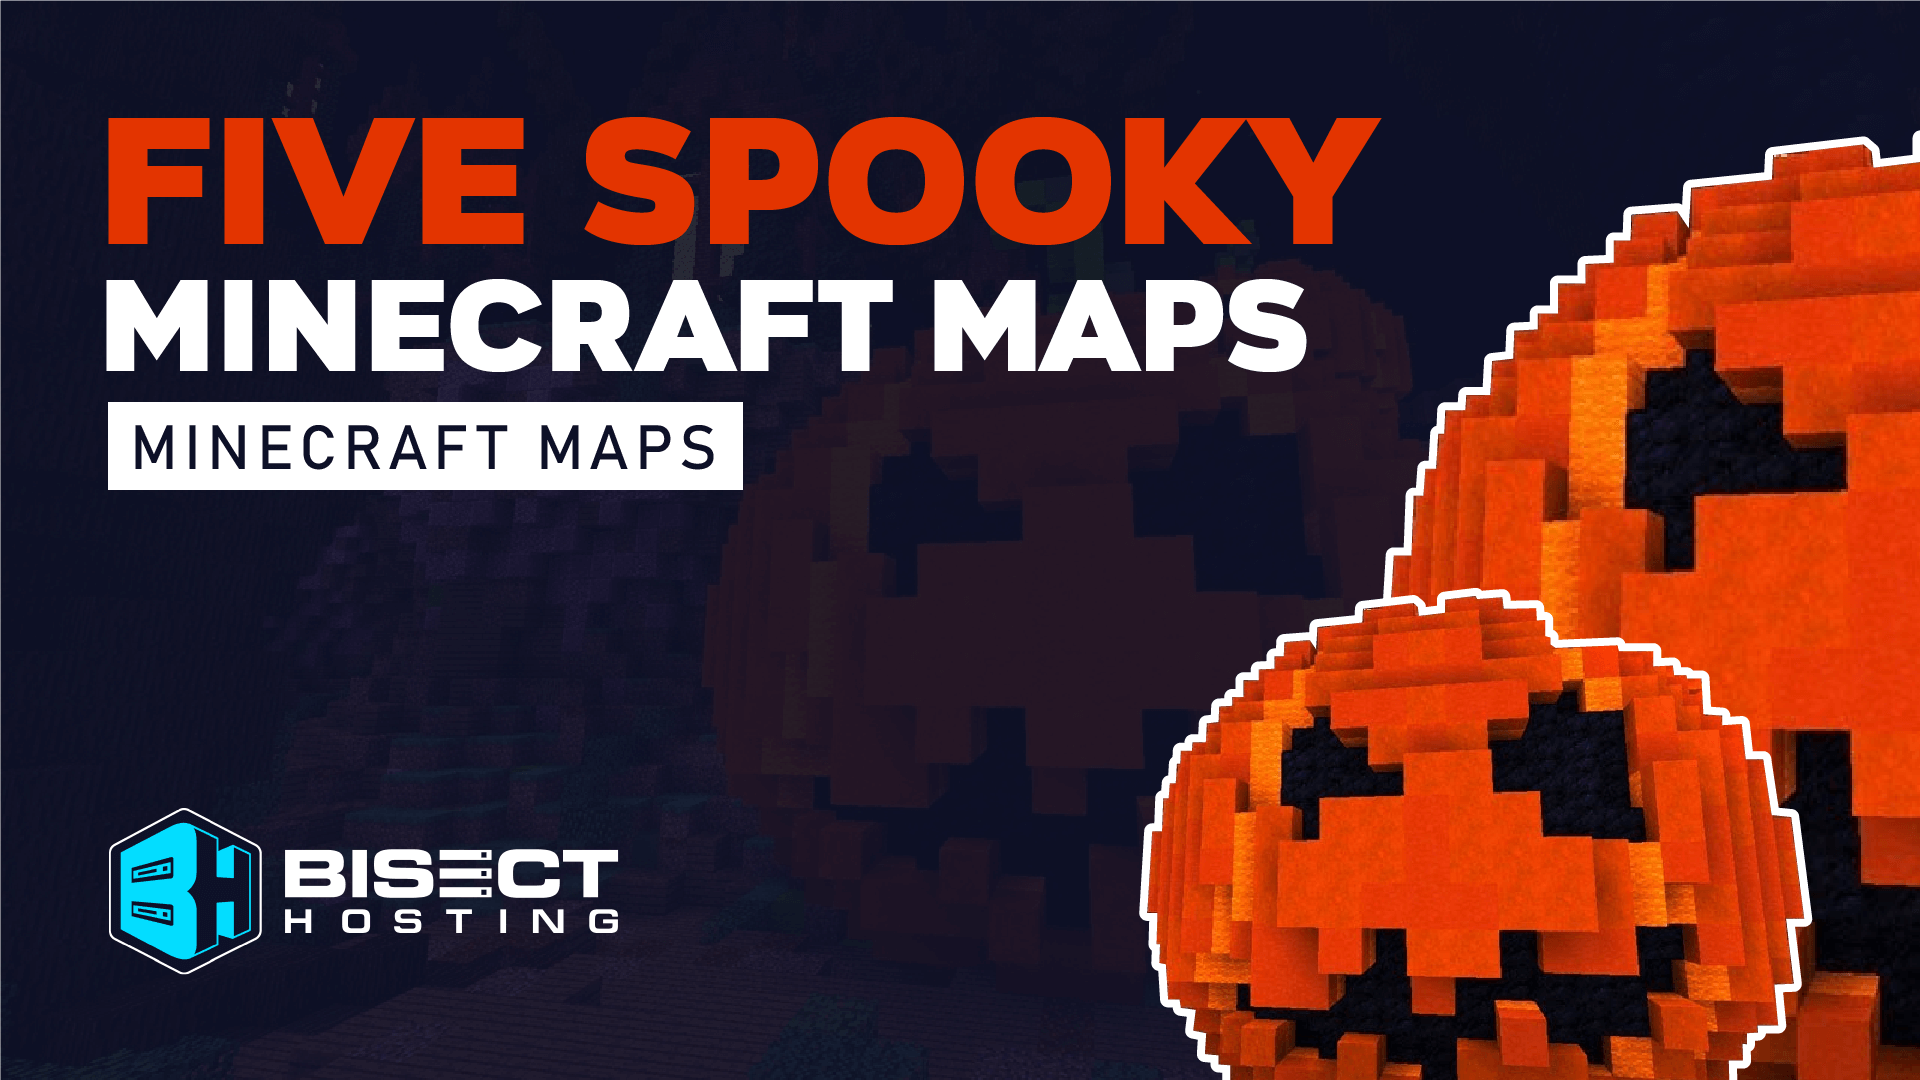 Five Scary Minecraft Maps That Will Make You Go “WA!”